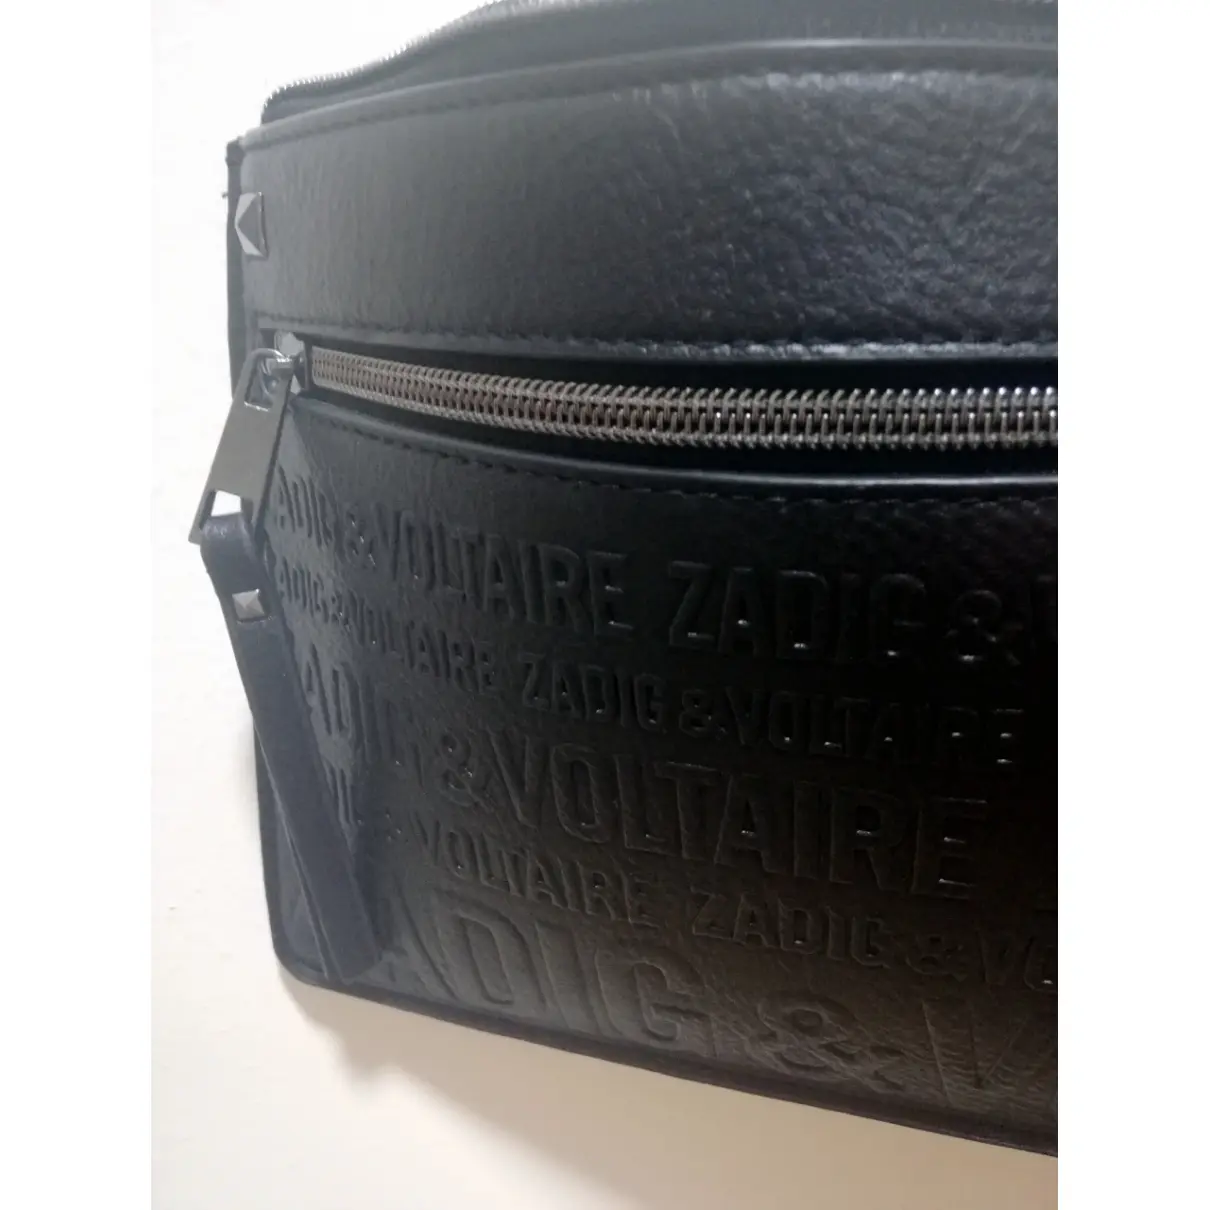 Buy Zadig & Voltaire Daily leather clutch bag online